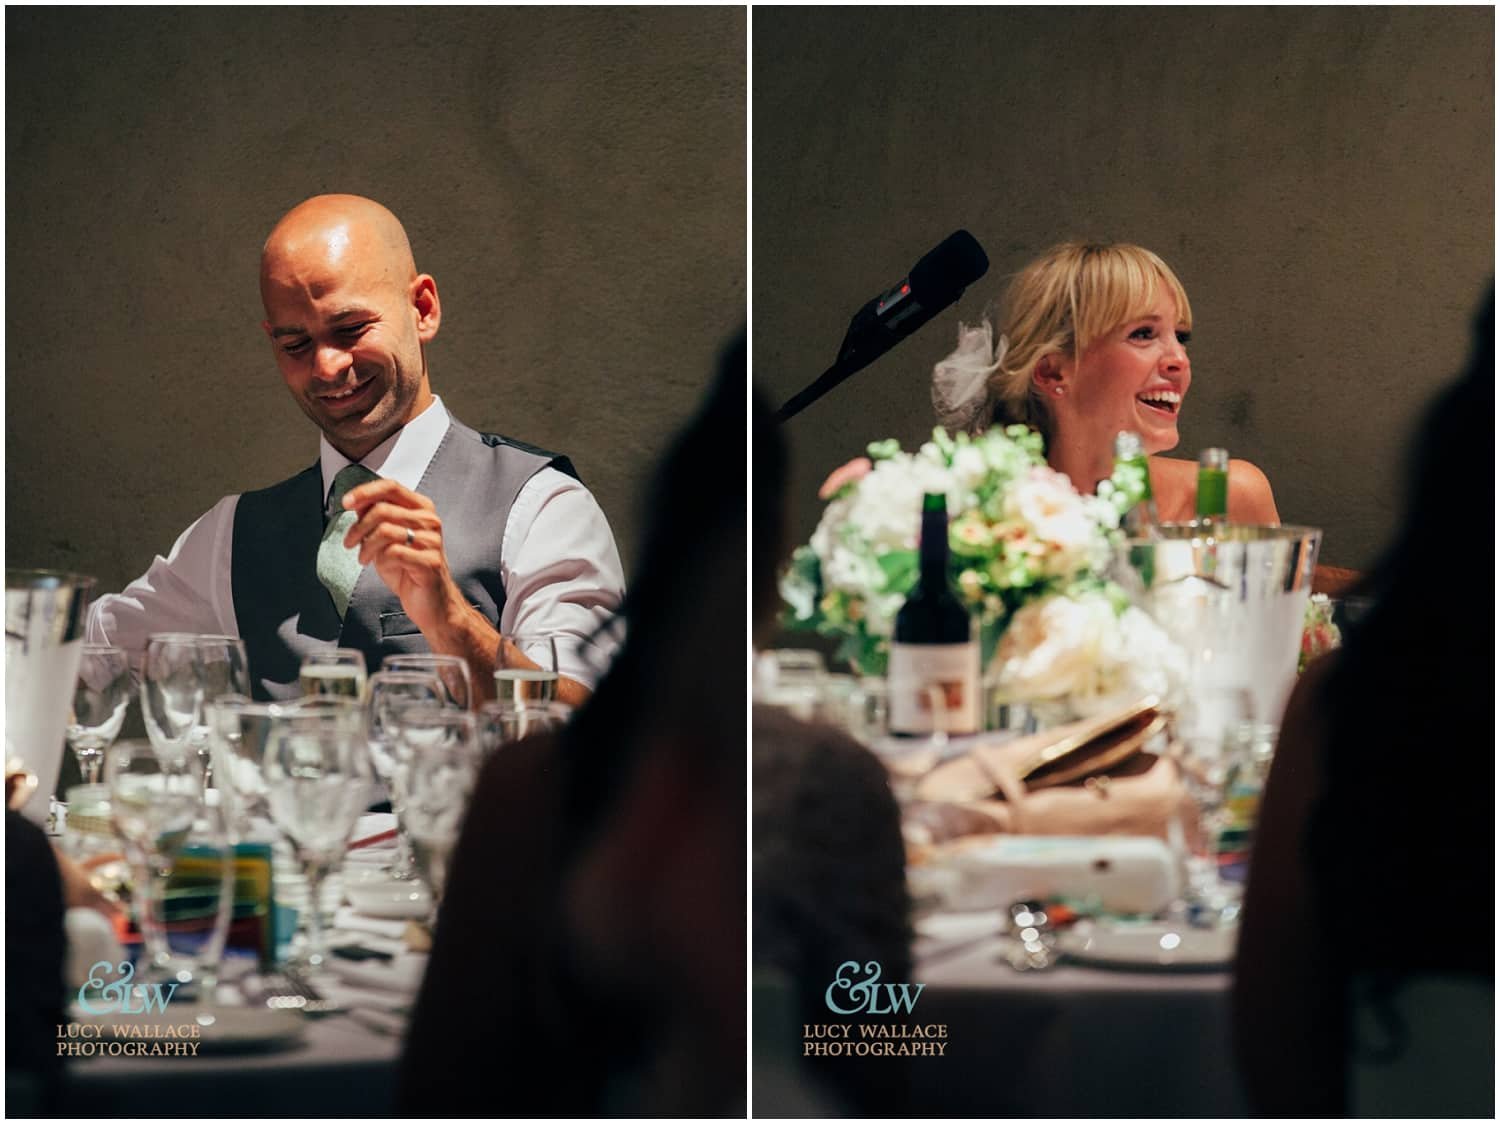 The wedding of Lauren and Jon at the Great Barn Devon, as photographed by Lucy Wallace